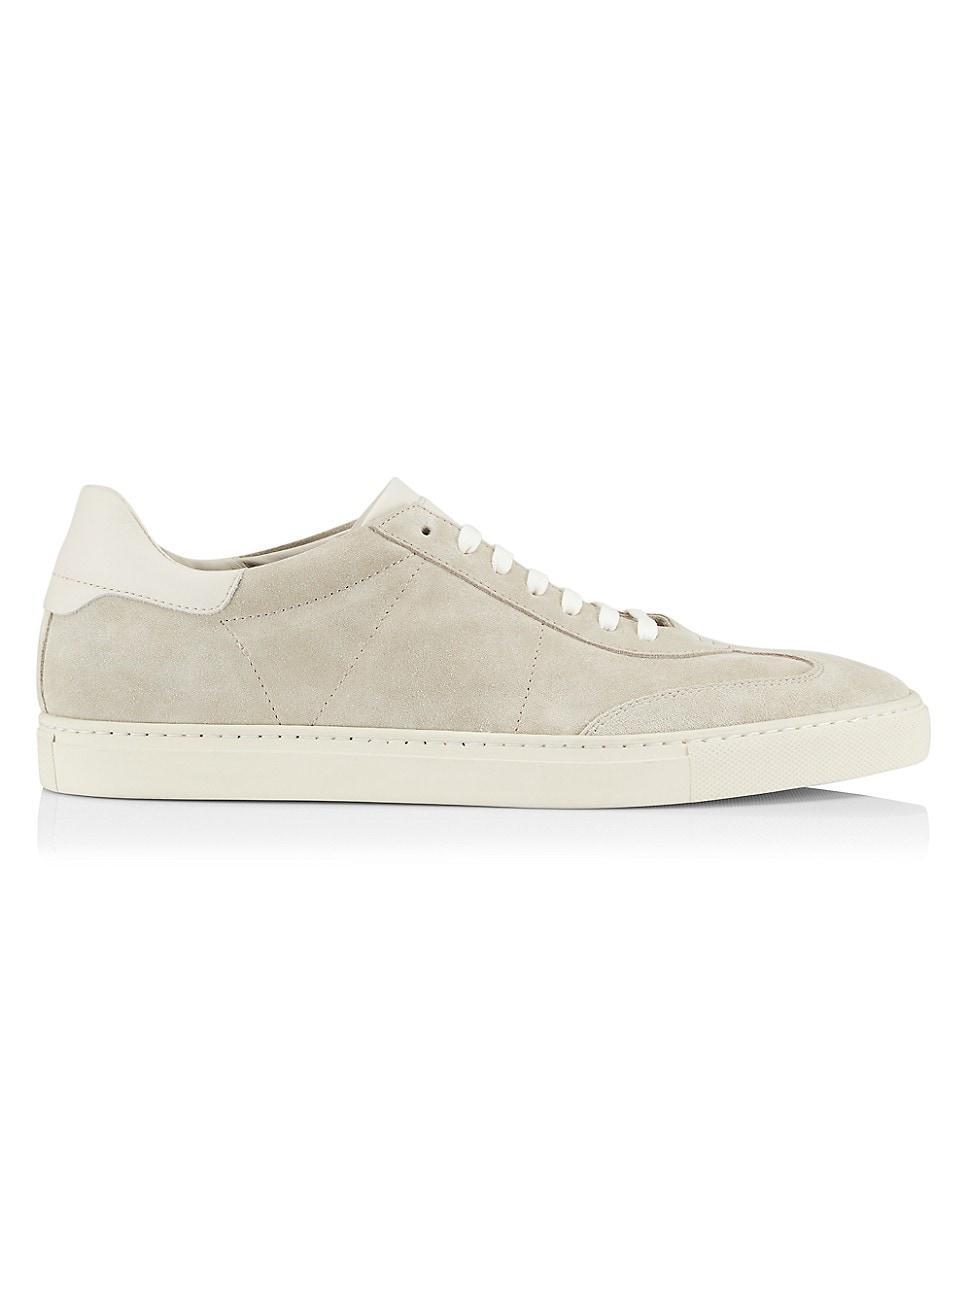 Mens Solaro Suede Sneakers Product Image